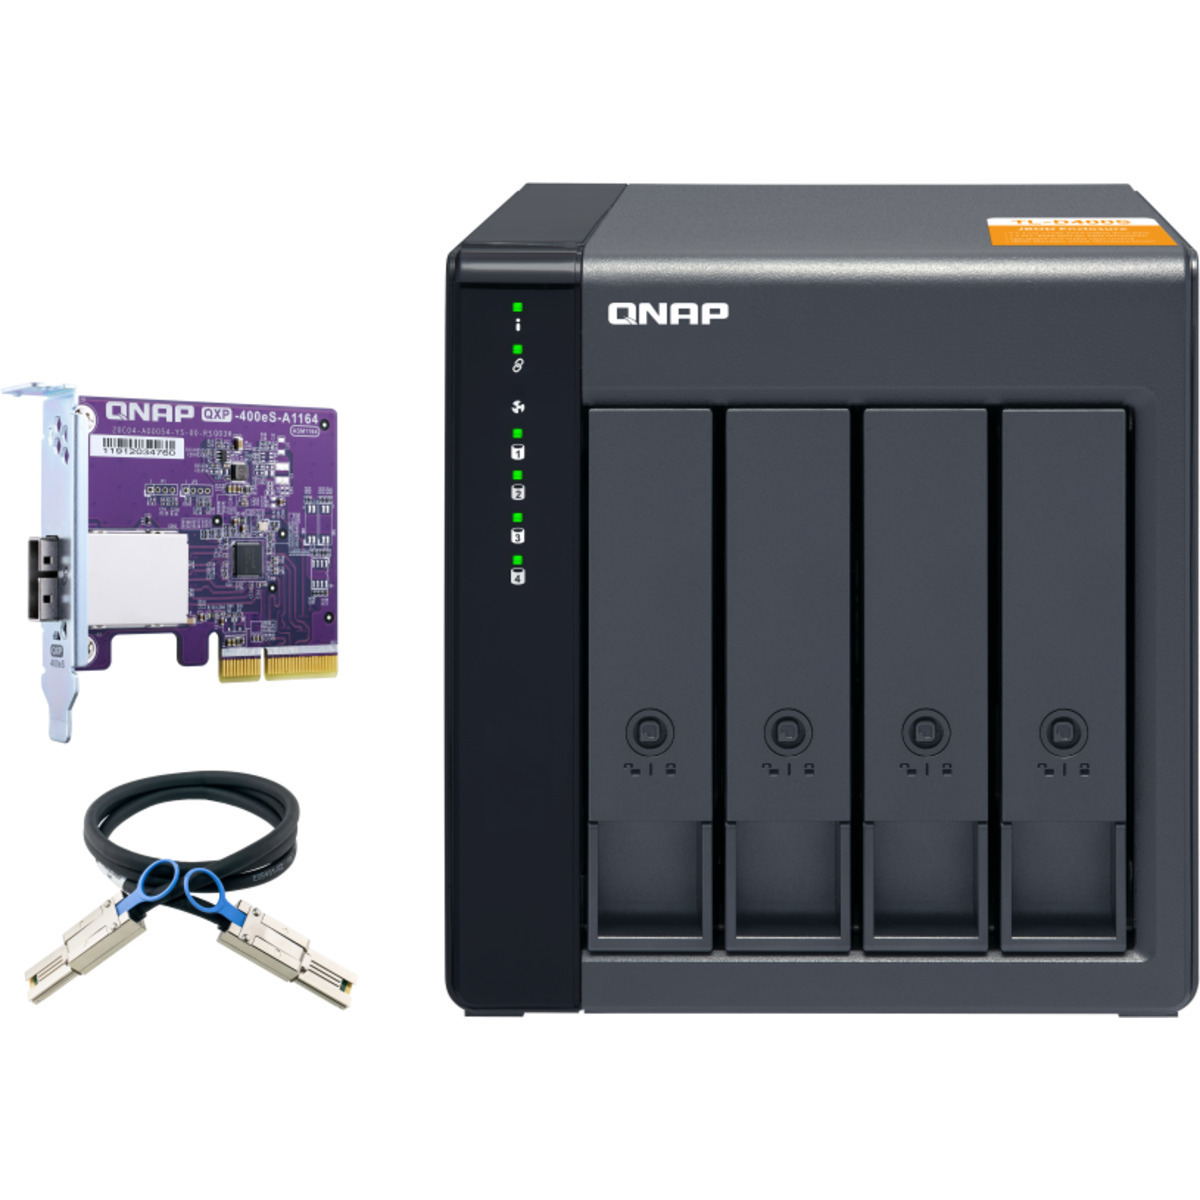 buy QNAP TL-D400S External Expansion Drive 88tb Desktop Expansion Enclosure 4x22000gb Western Digital Ultrastar HC570 WUH722222ALE6L4 3.5 7200rpm SATA 6Gb/s HDD ENTERPRISE Class Drives Installed - Burn-In Tested - nas headquarters buy network attached storage server device das new raid-5 free shipping simply usa TL-D400S External Expansion Drive